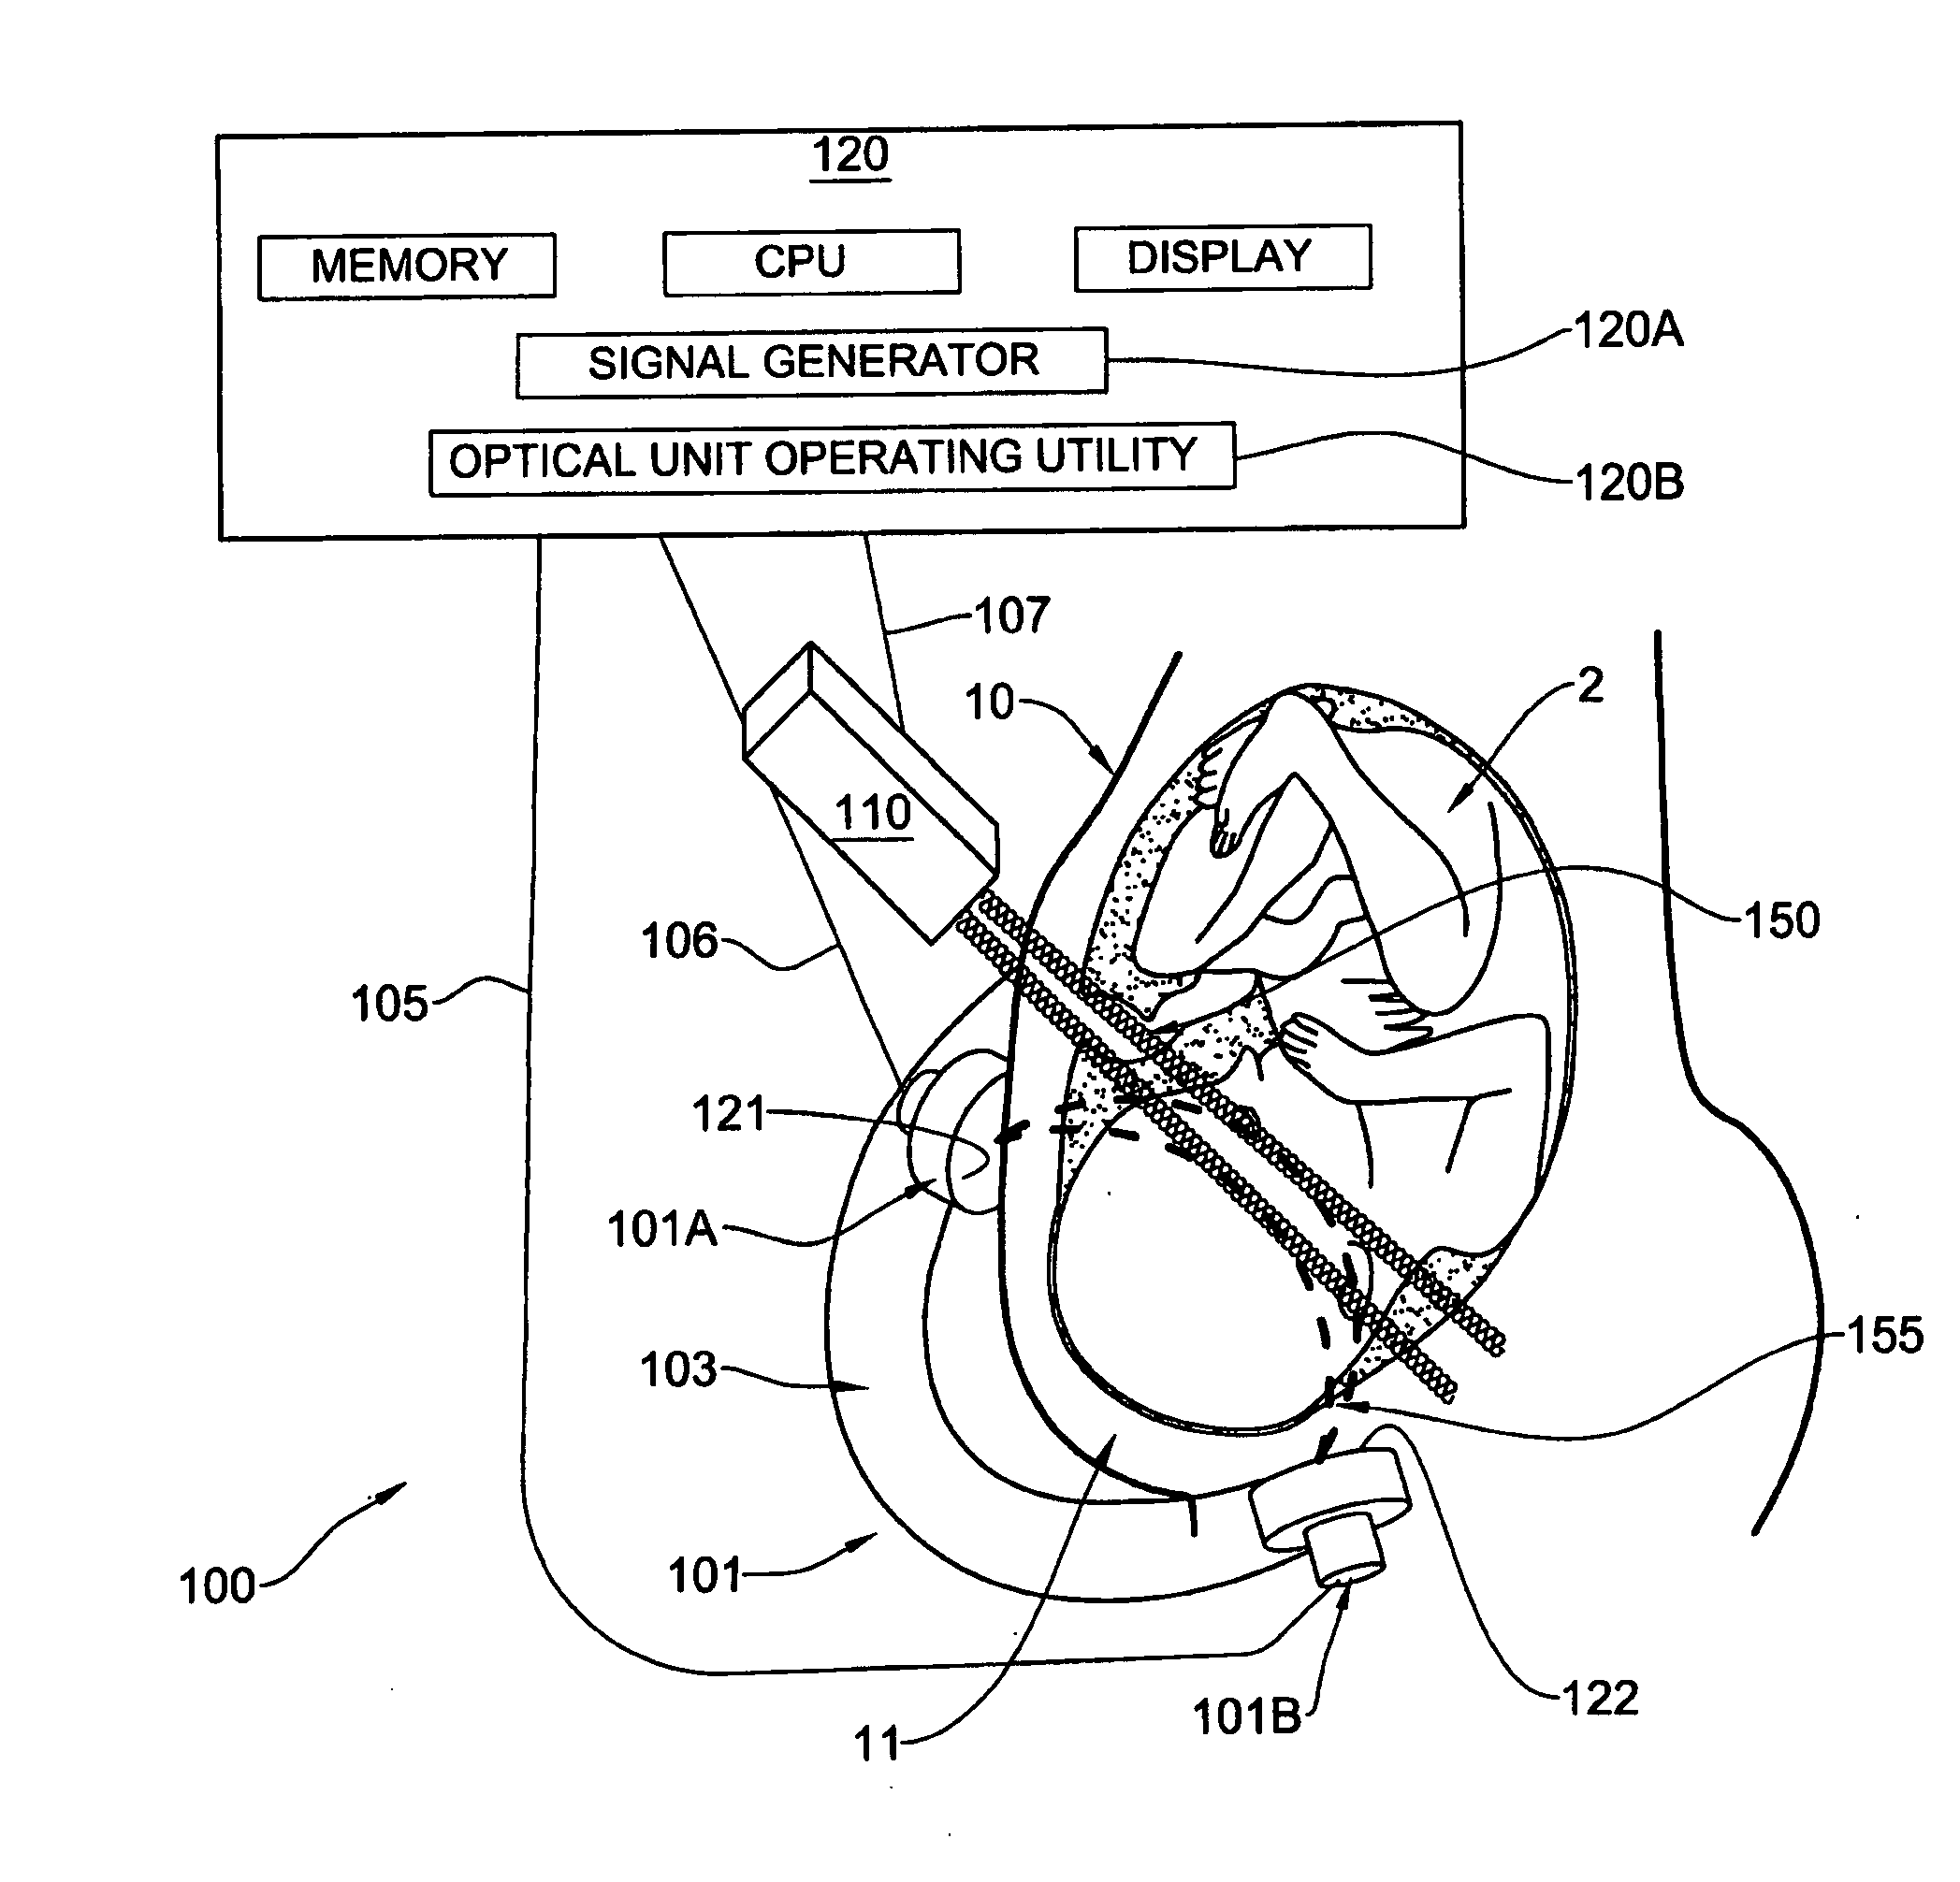 Method and apparatus for noninvasively monitoring parameters of a region of interest in a human body